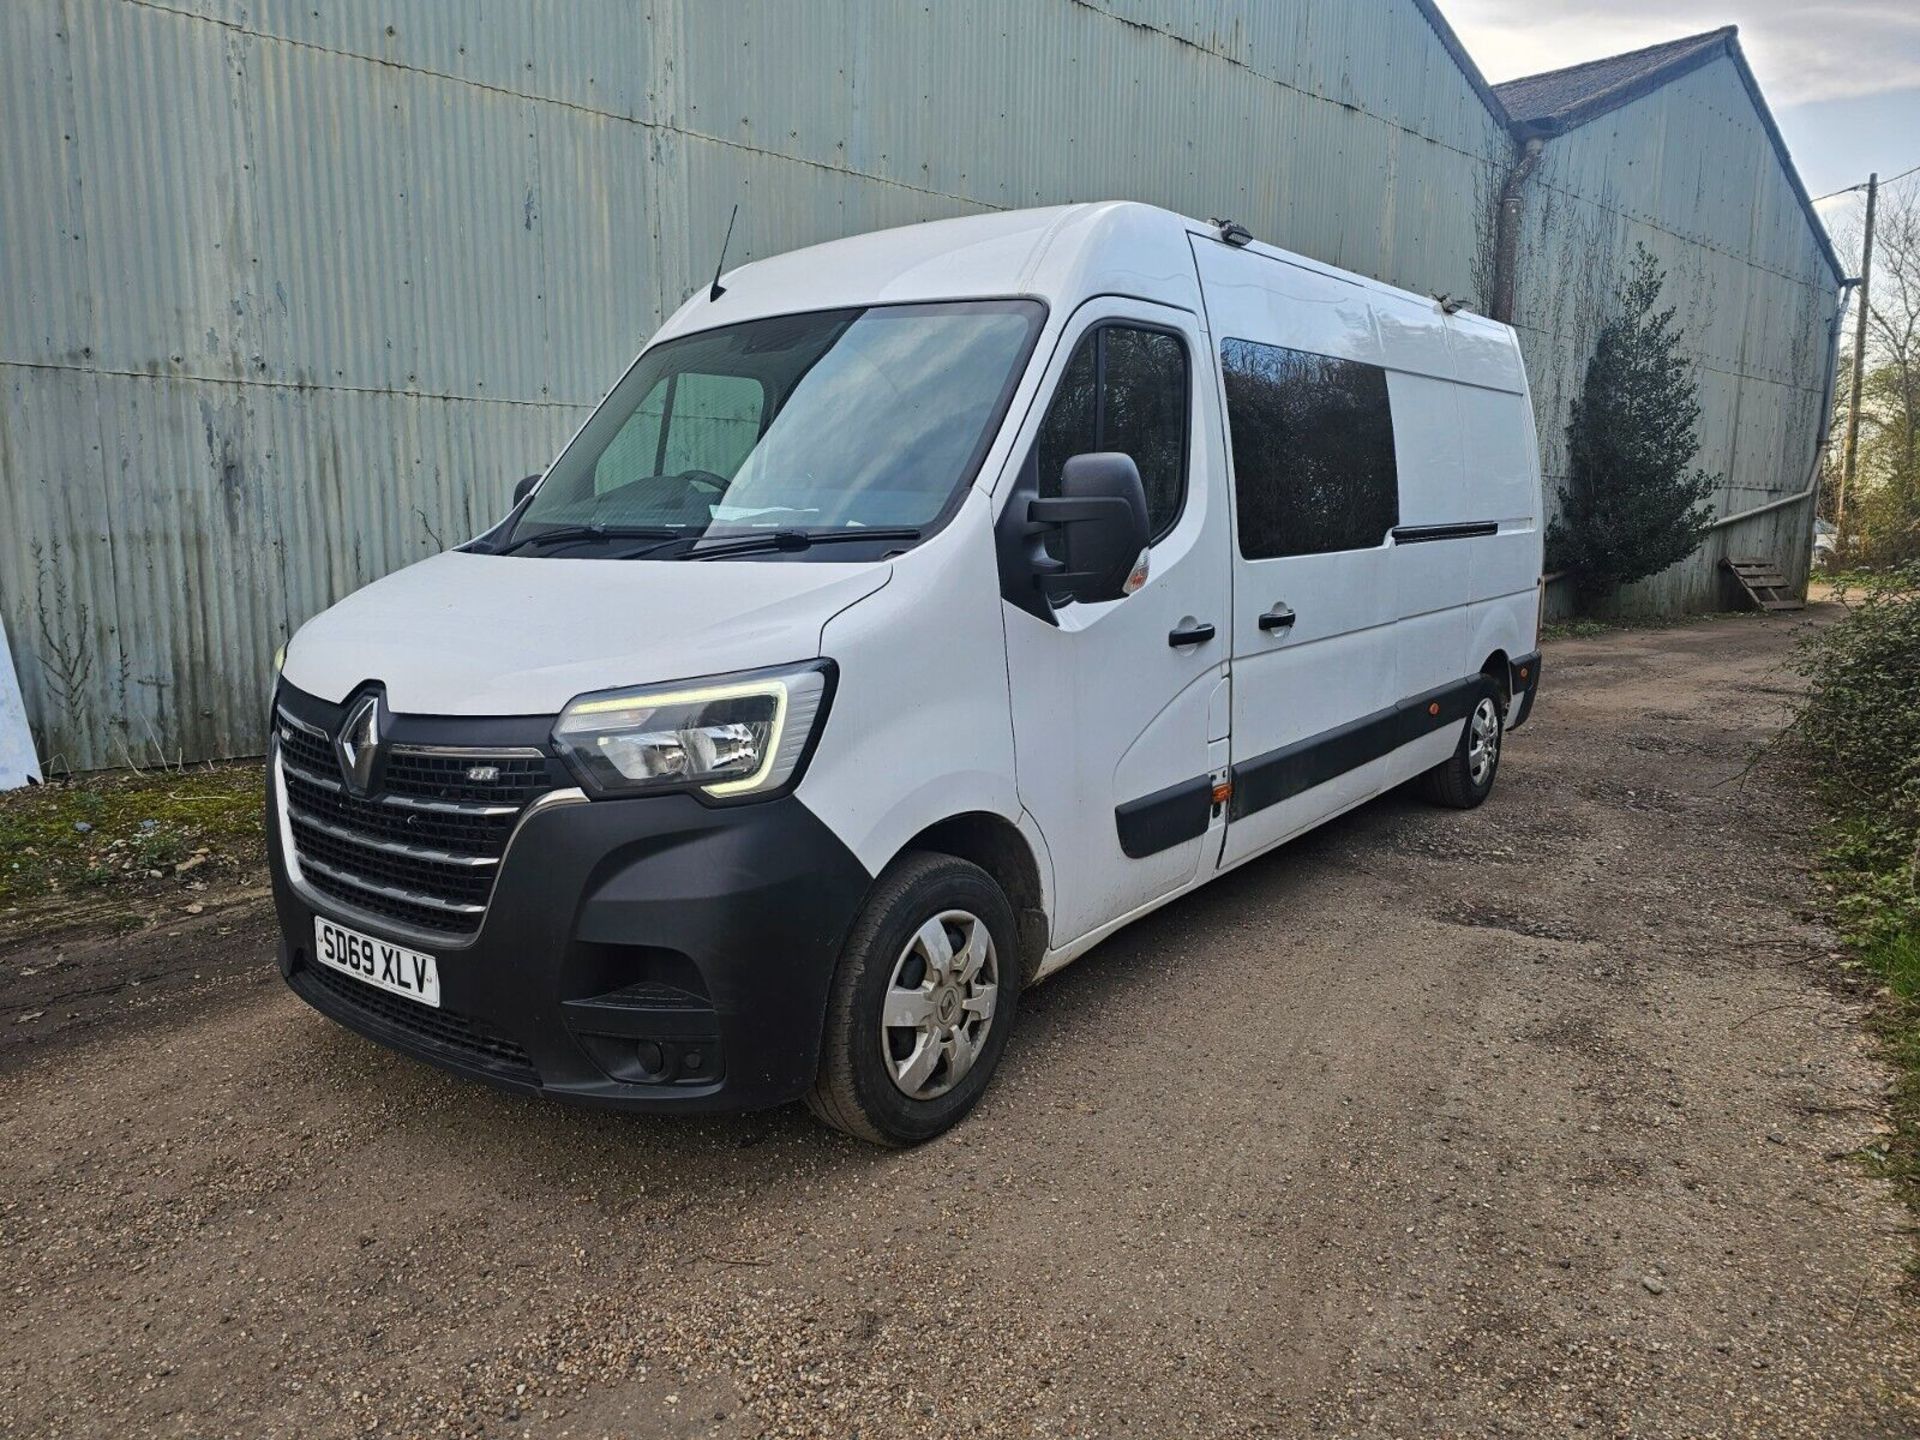 2020 RENAULT MASTER BUSINESS PLUS, FULLY LOADED - Image 2 of 5